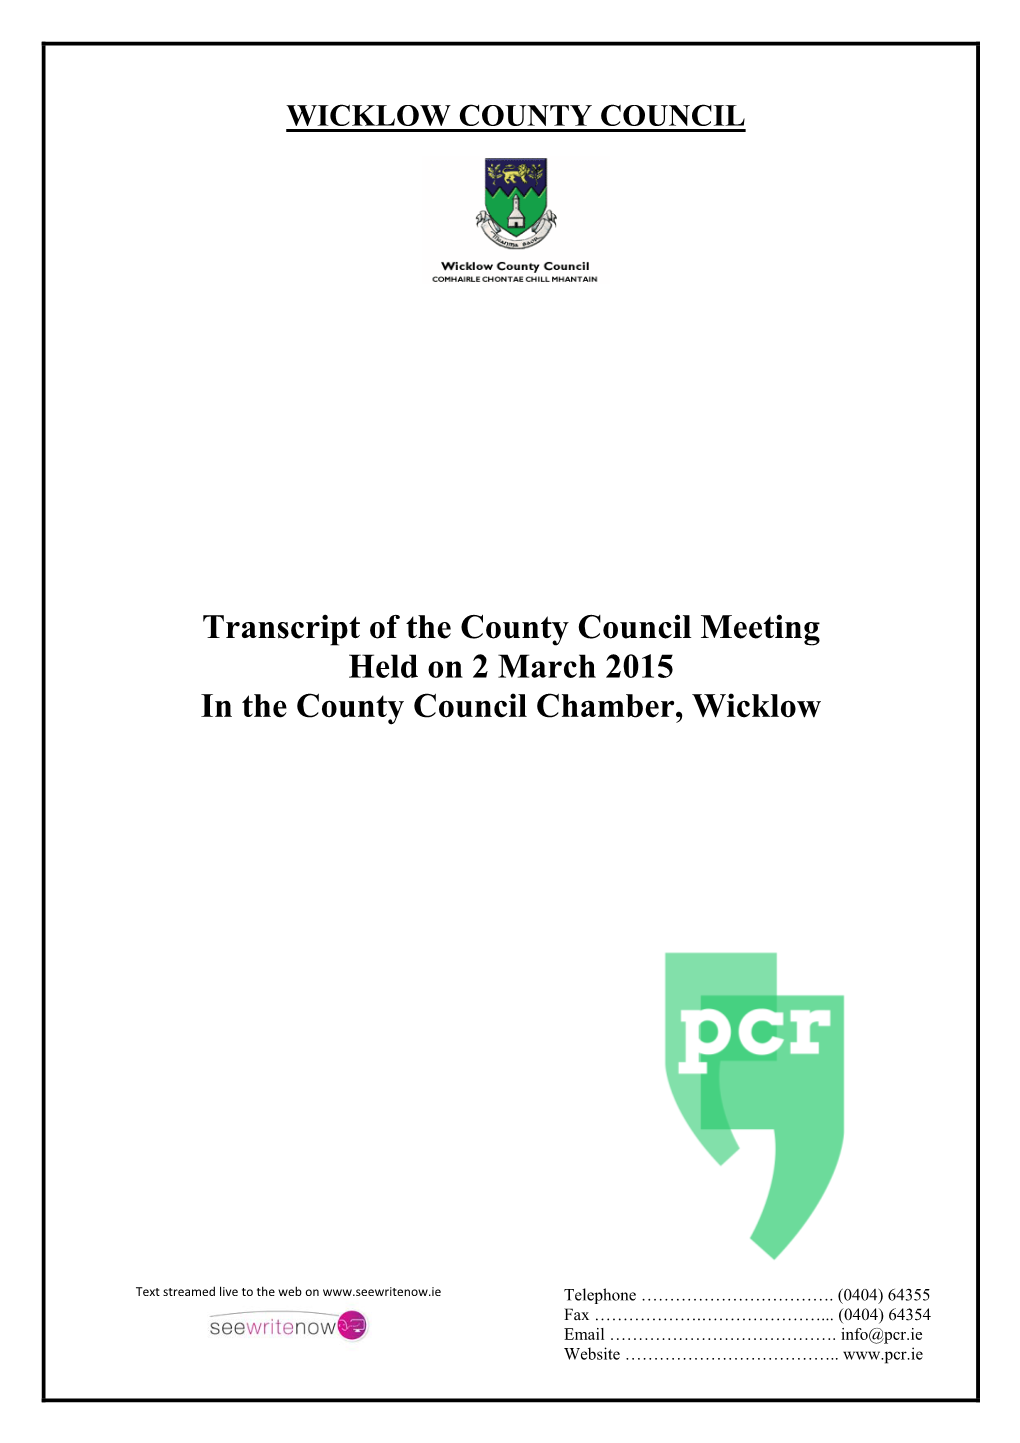 Transcript of the County Council Meeting Held on 2 March 2015 in the County Council Chamber, Wicklow